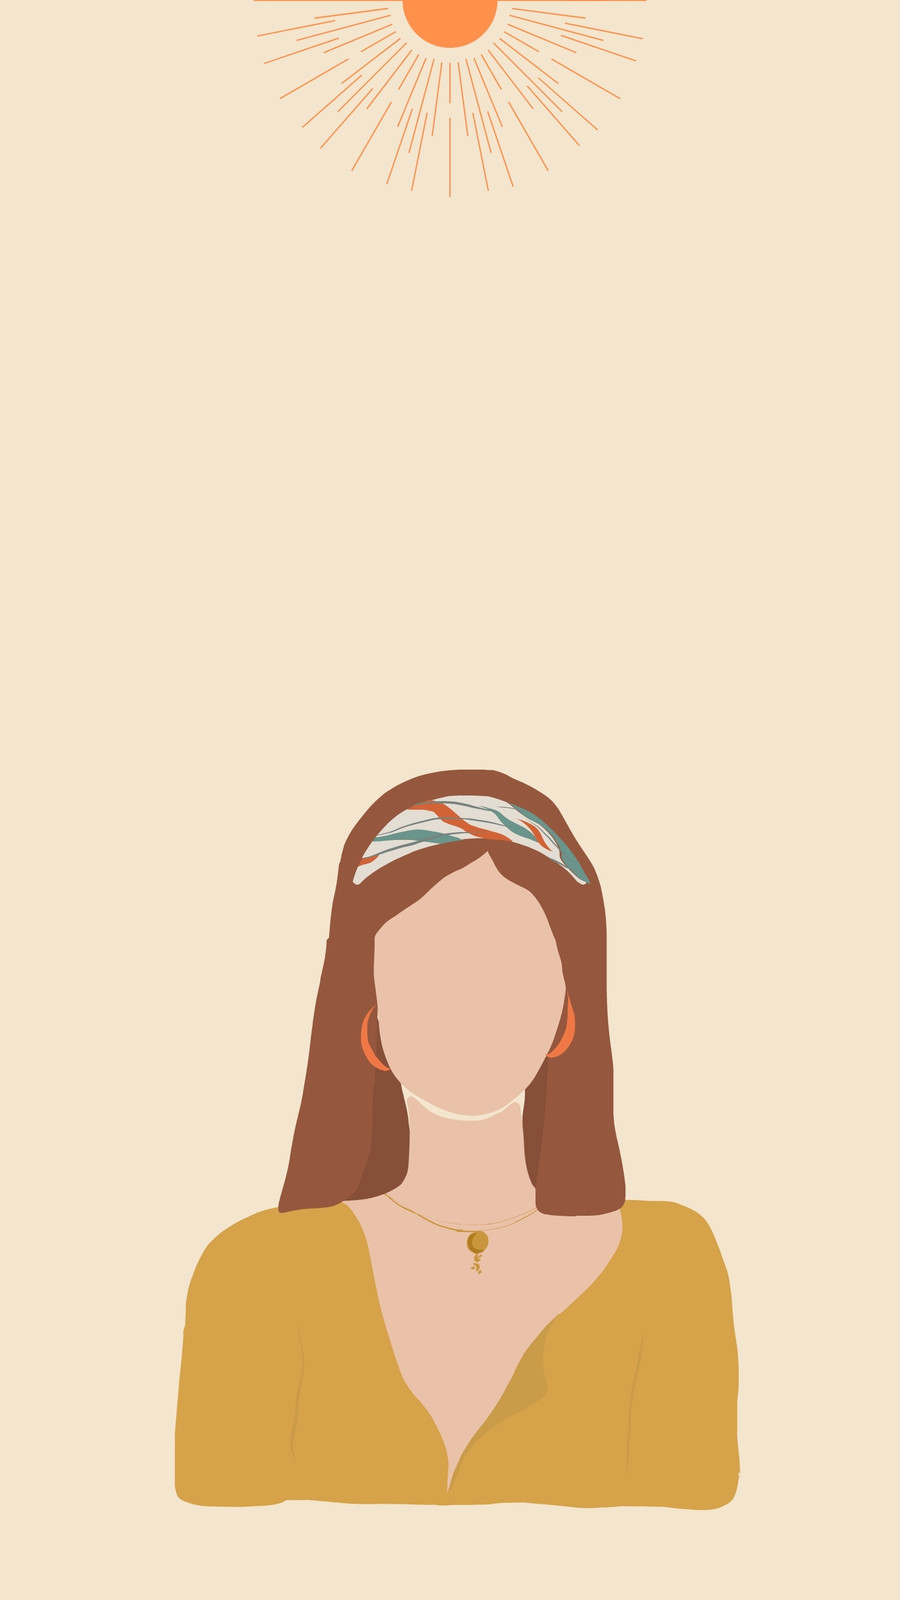 Free Minimalist Abstract Aesthetic Woman Mobile Wallpaper template